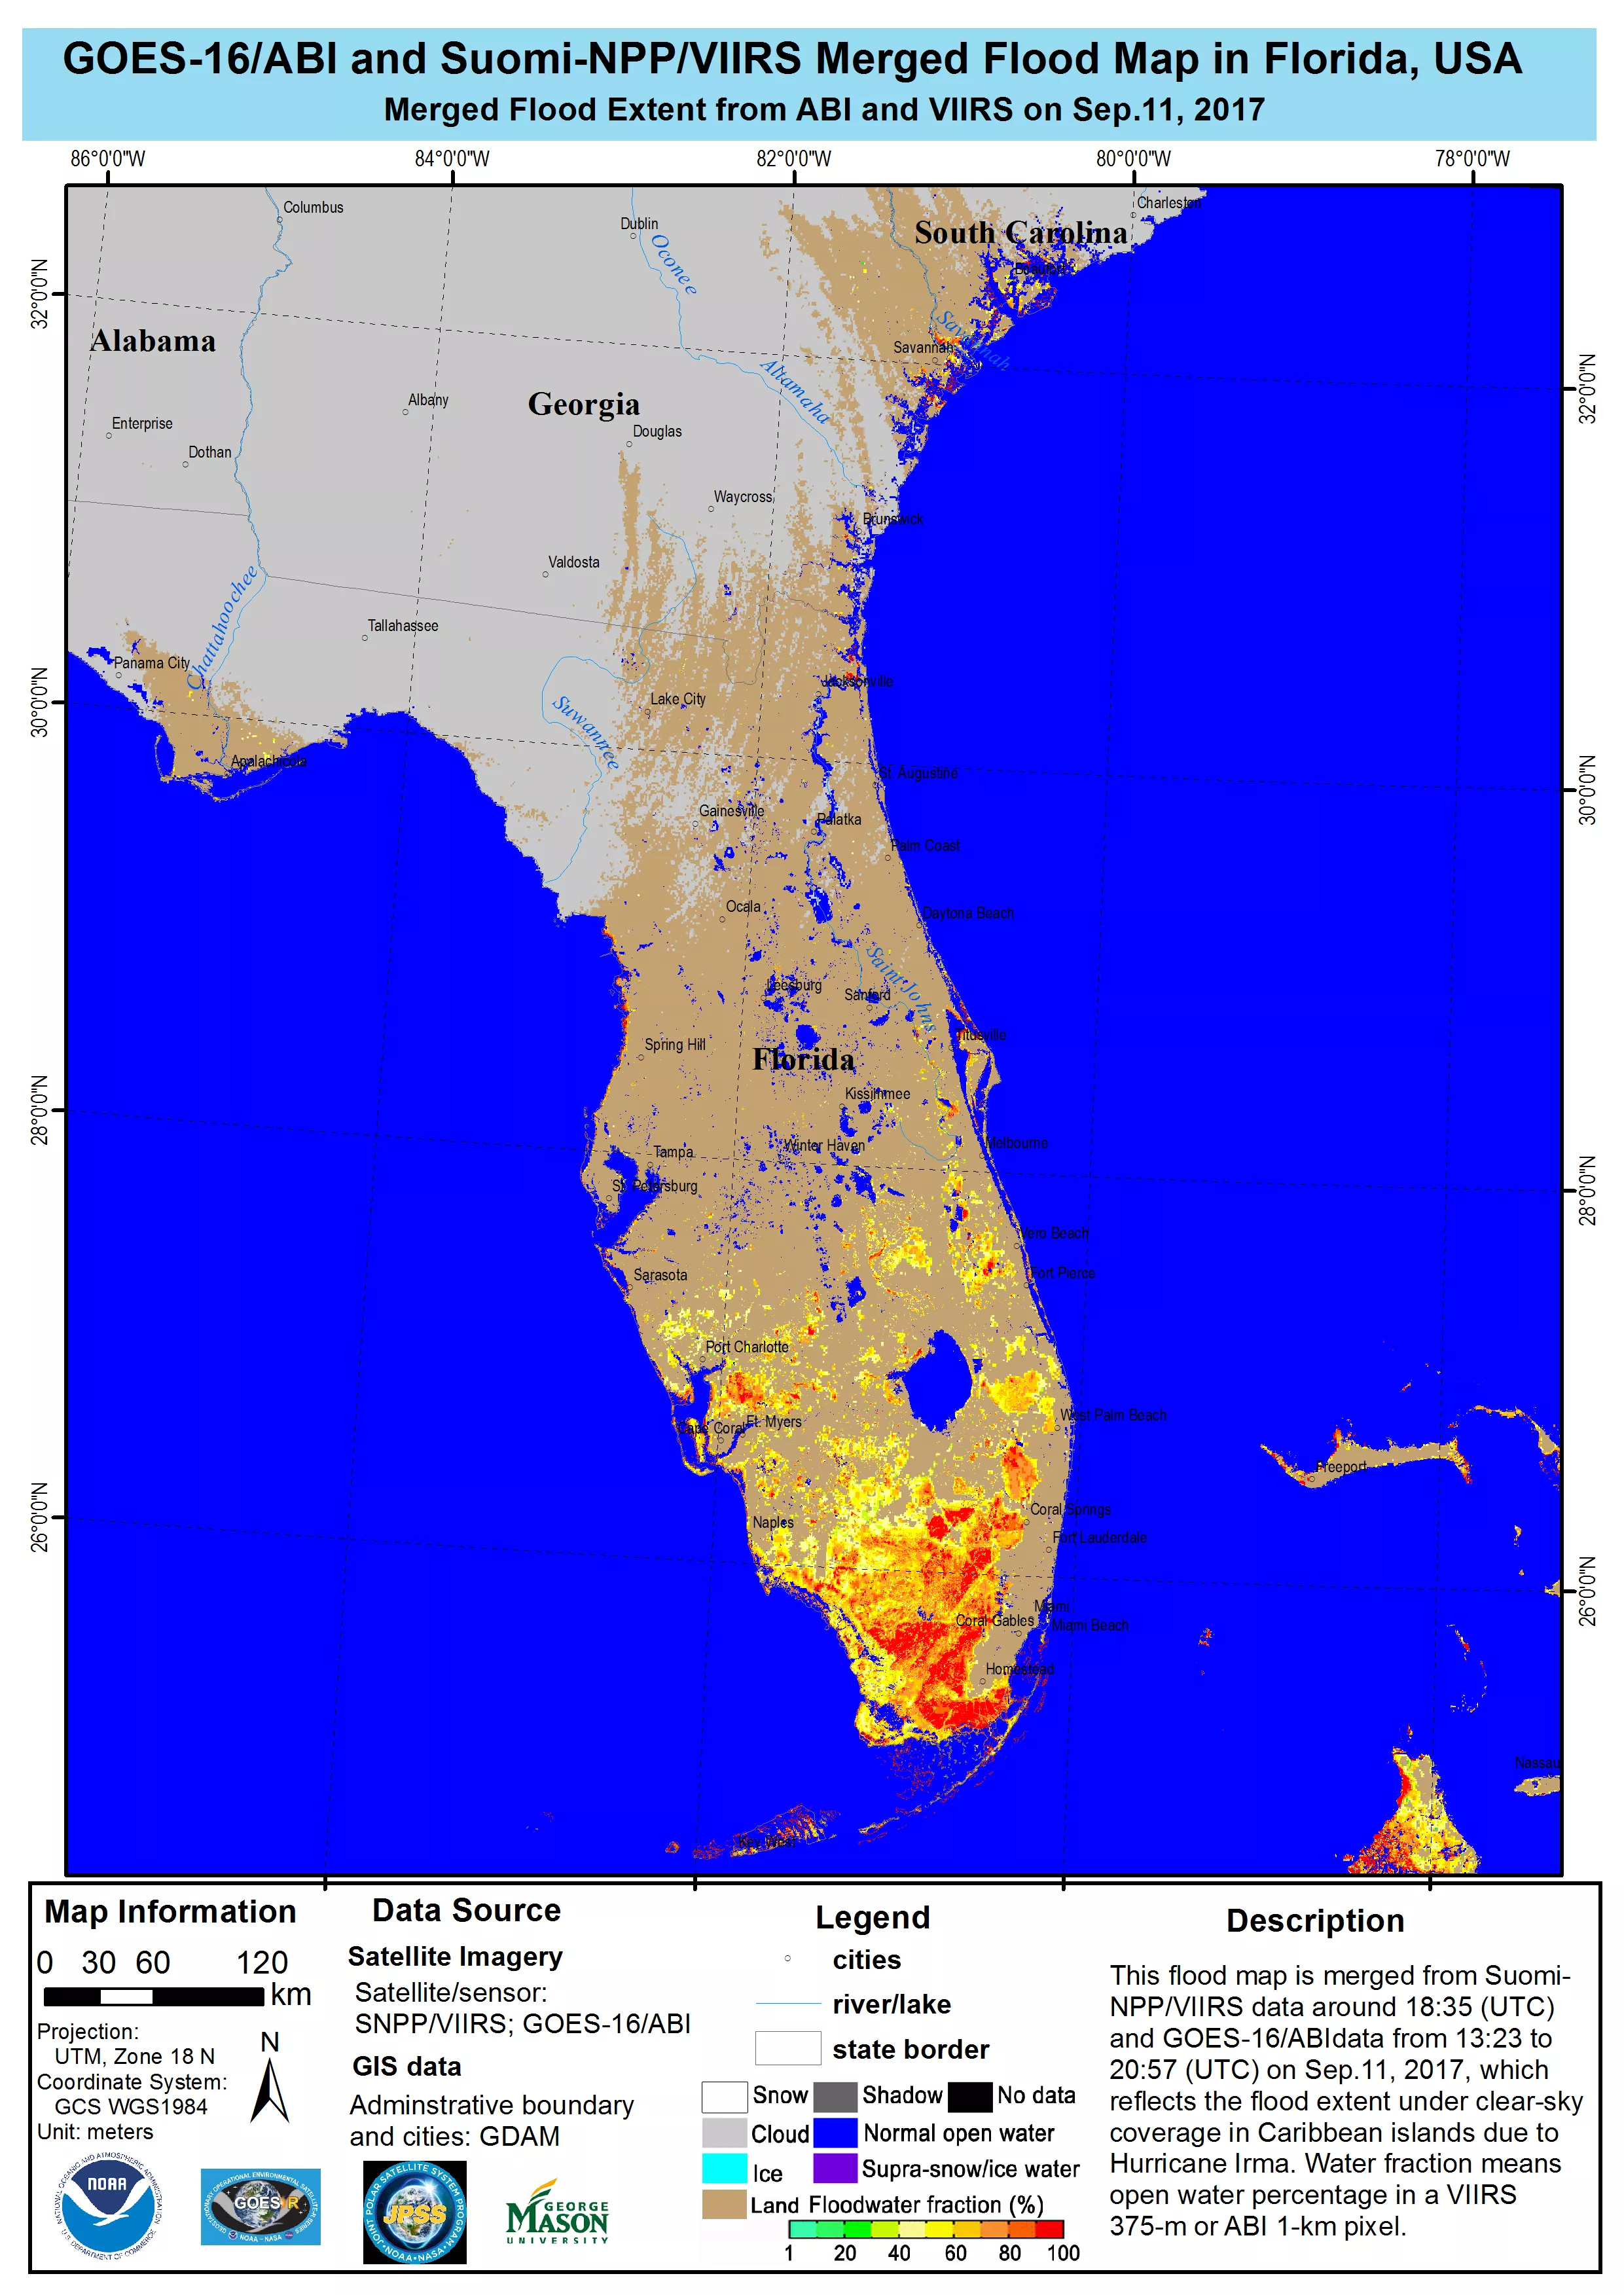 Florida after Irma, merged flood map, floodwater fraction